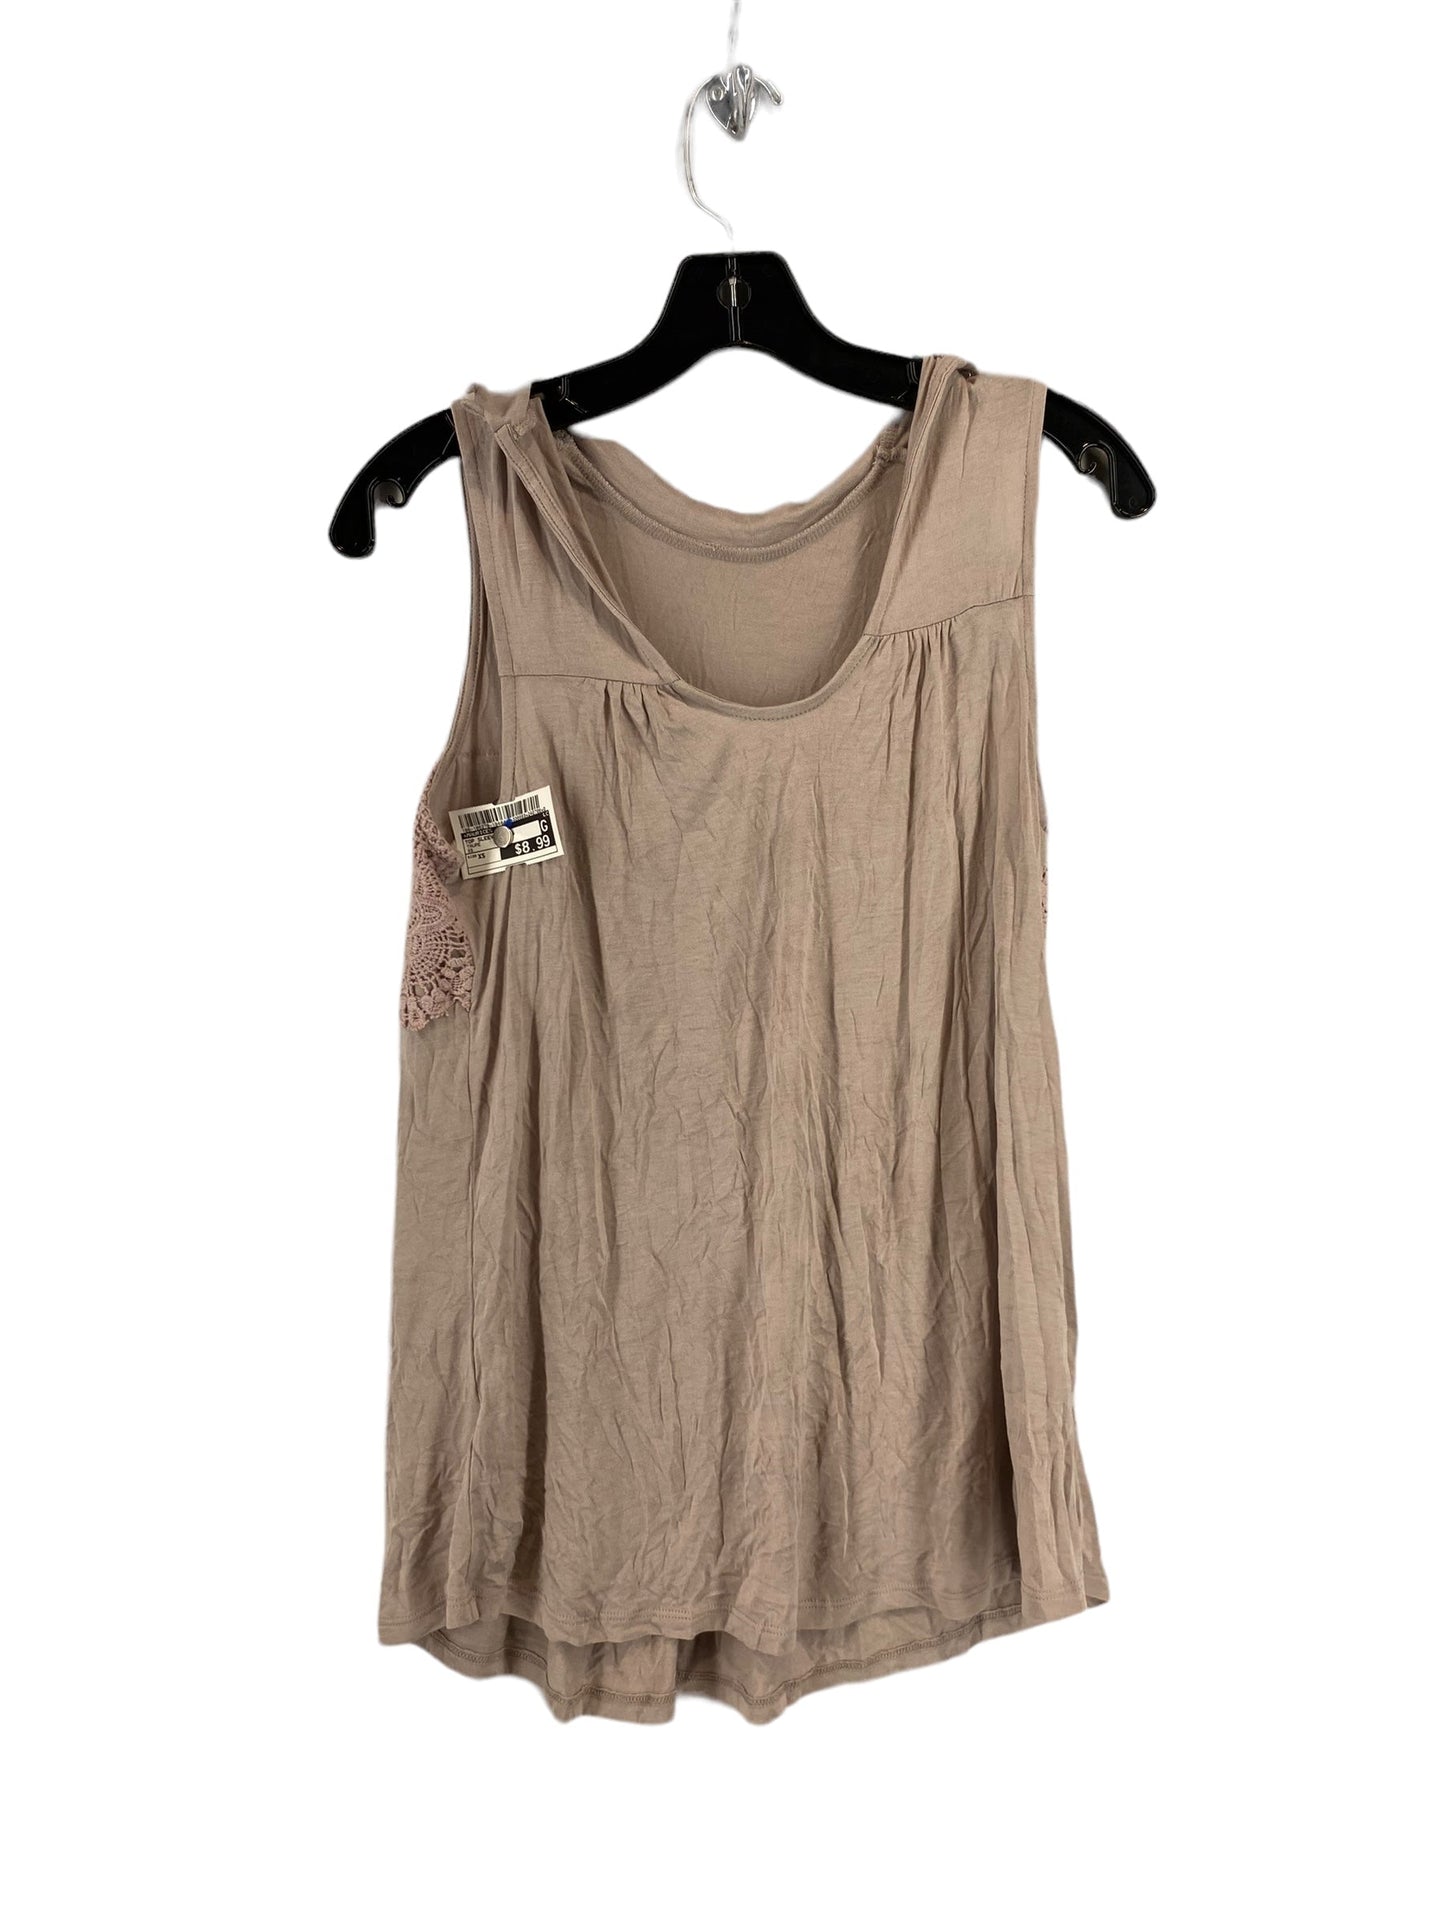 Taupe Top Sleeveless Maurices, Size Xs